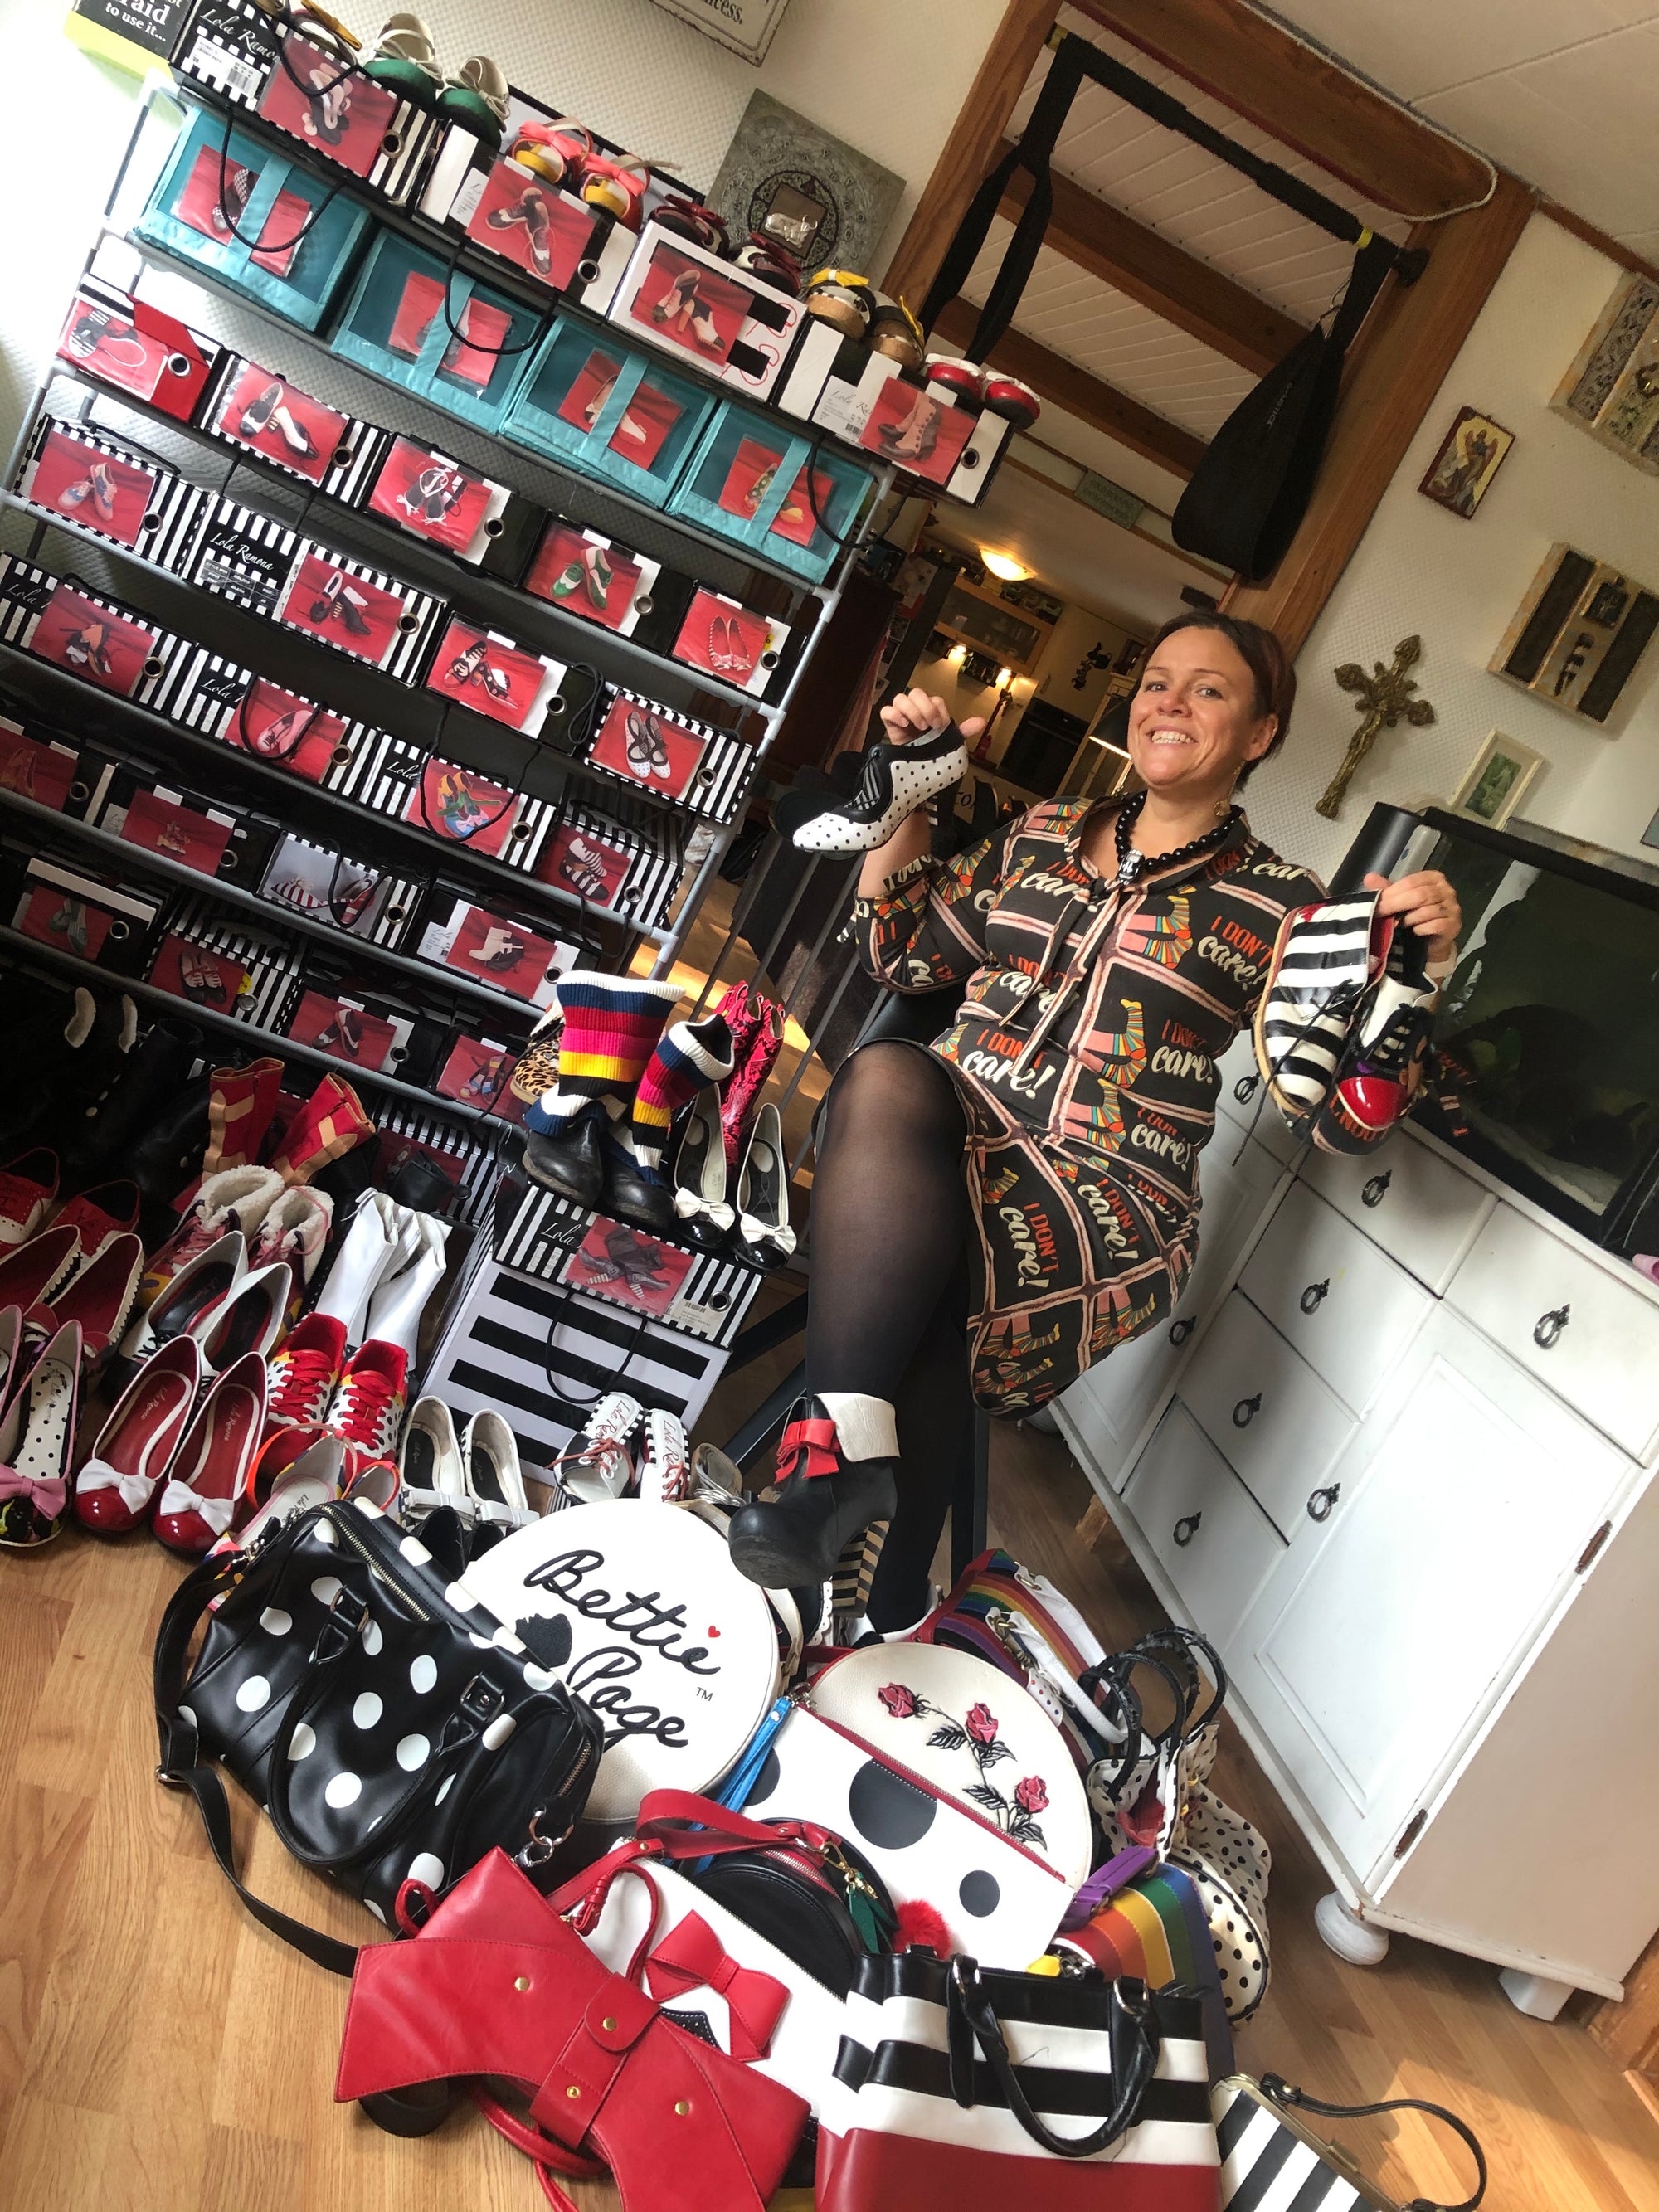 Meet Stephanie: A busy mum with a collection so big it needs its own book!